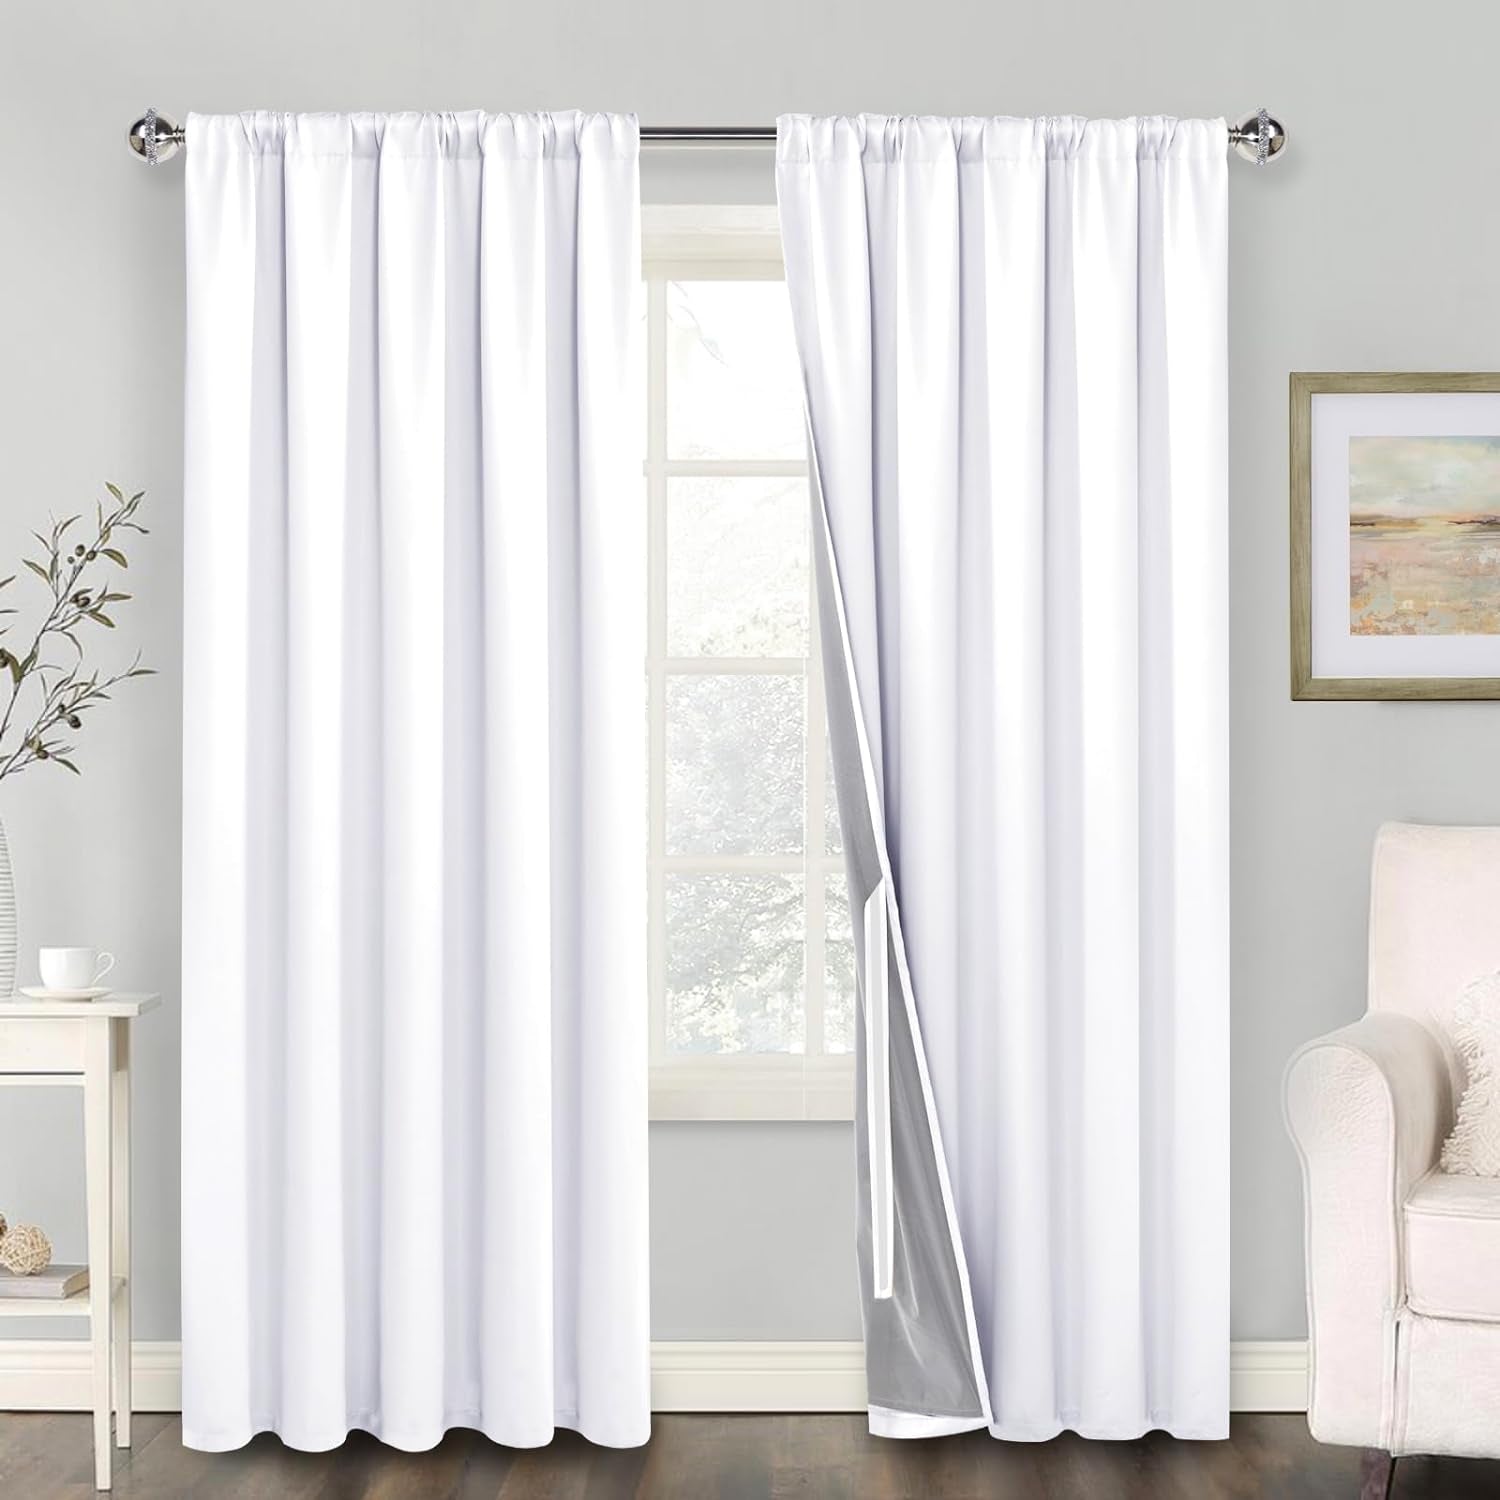 100% Blackout Curtains 2 Panels with Tiebacks- Heat and Full Light Blocking Window Treatment with Black Liner for Bedroom/Nursery, Rod Pocket & Back Tab，White, W52 X L84 Inches Long, Set of 2  XWZO   